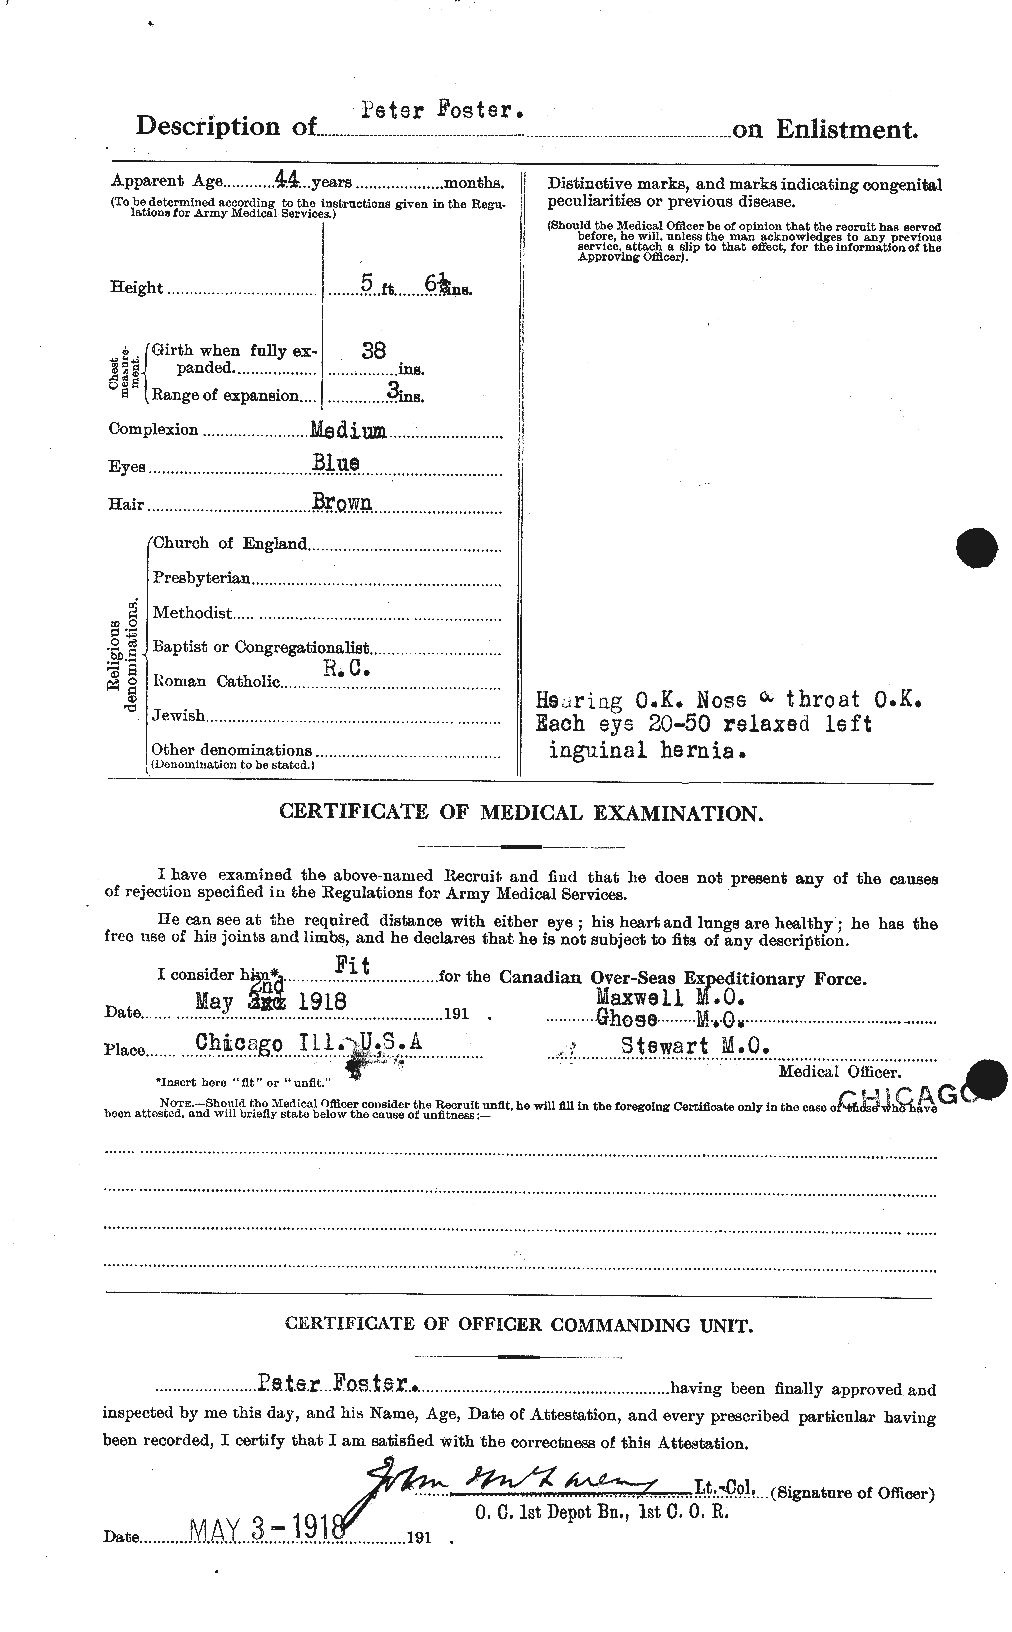 Personnel Records of the First World War - CEF 333444b